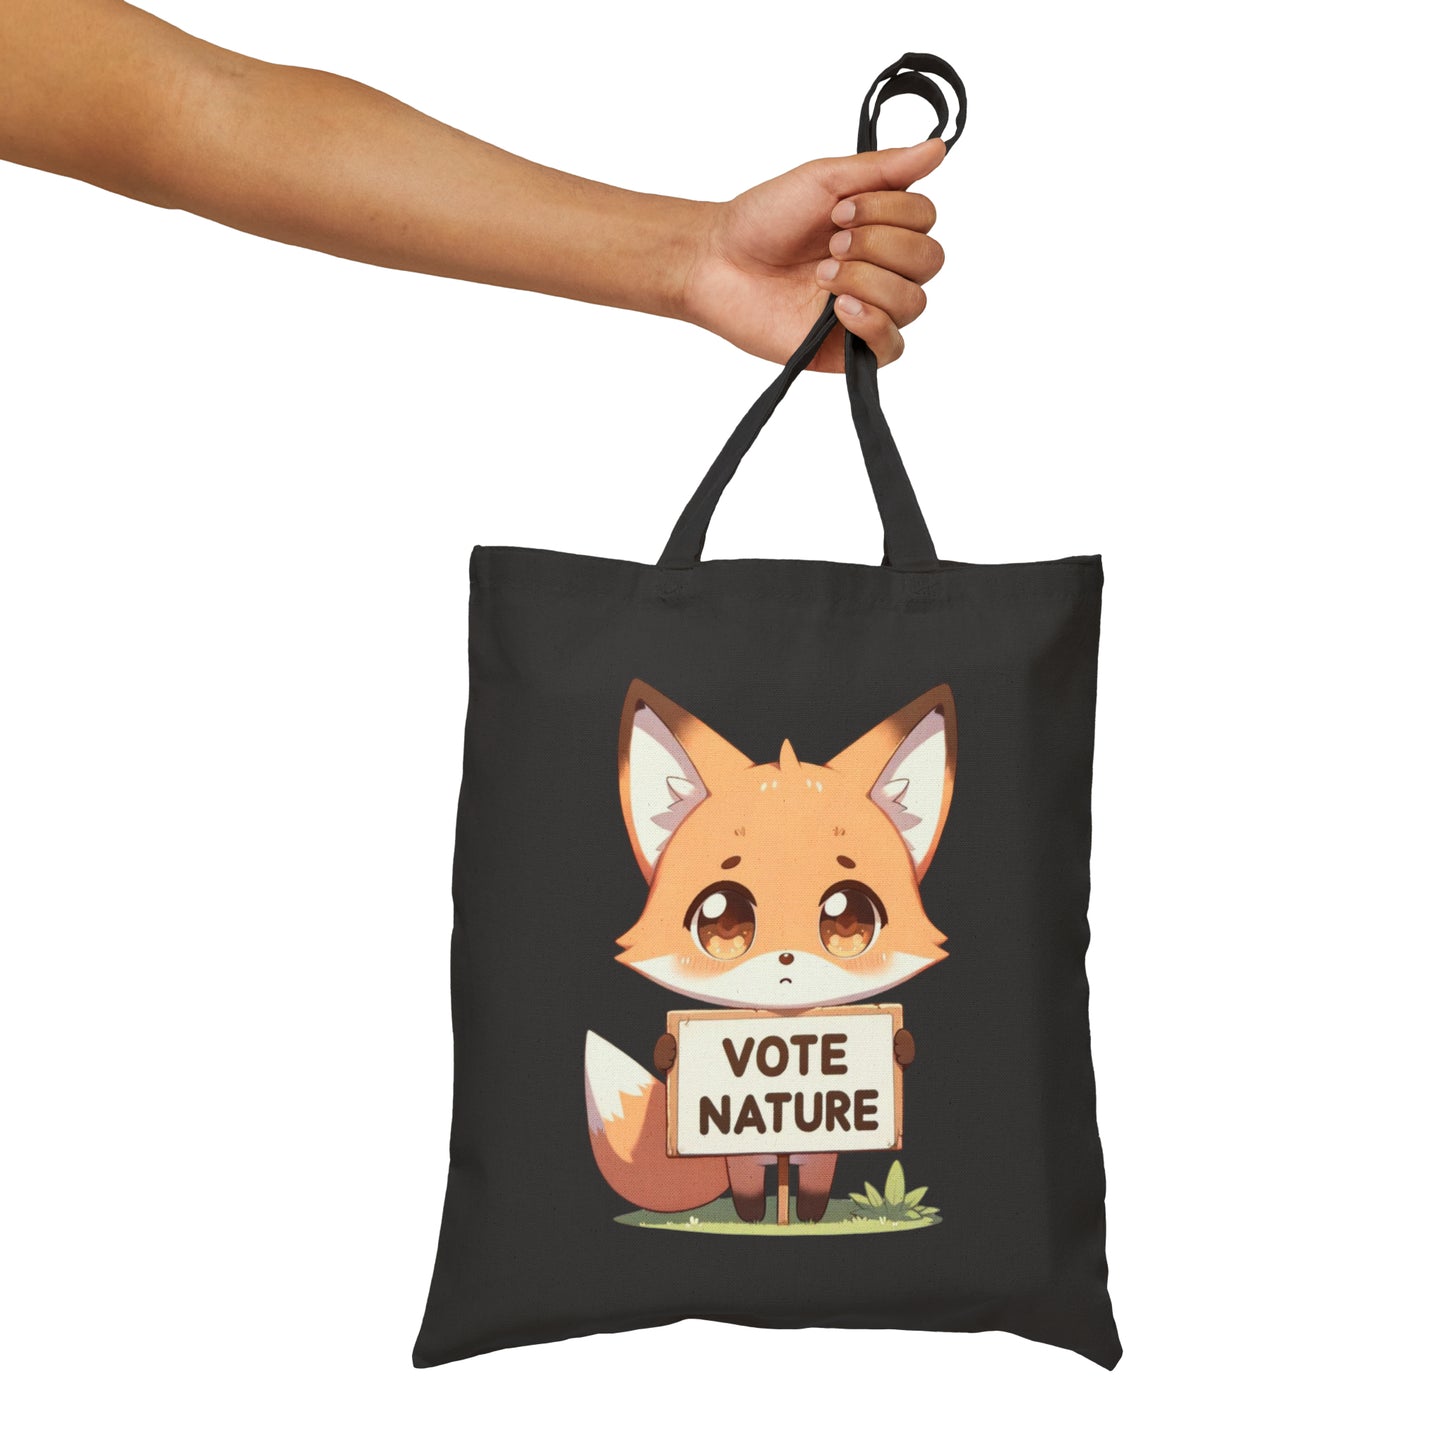 Inspirational Cute Fox Statement Cotton Canvas Tote Bag: Vote Nature! & carry a laptop, kindle, phone, notebook, goodies to work/coffee shop